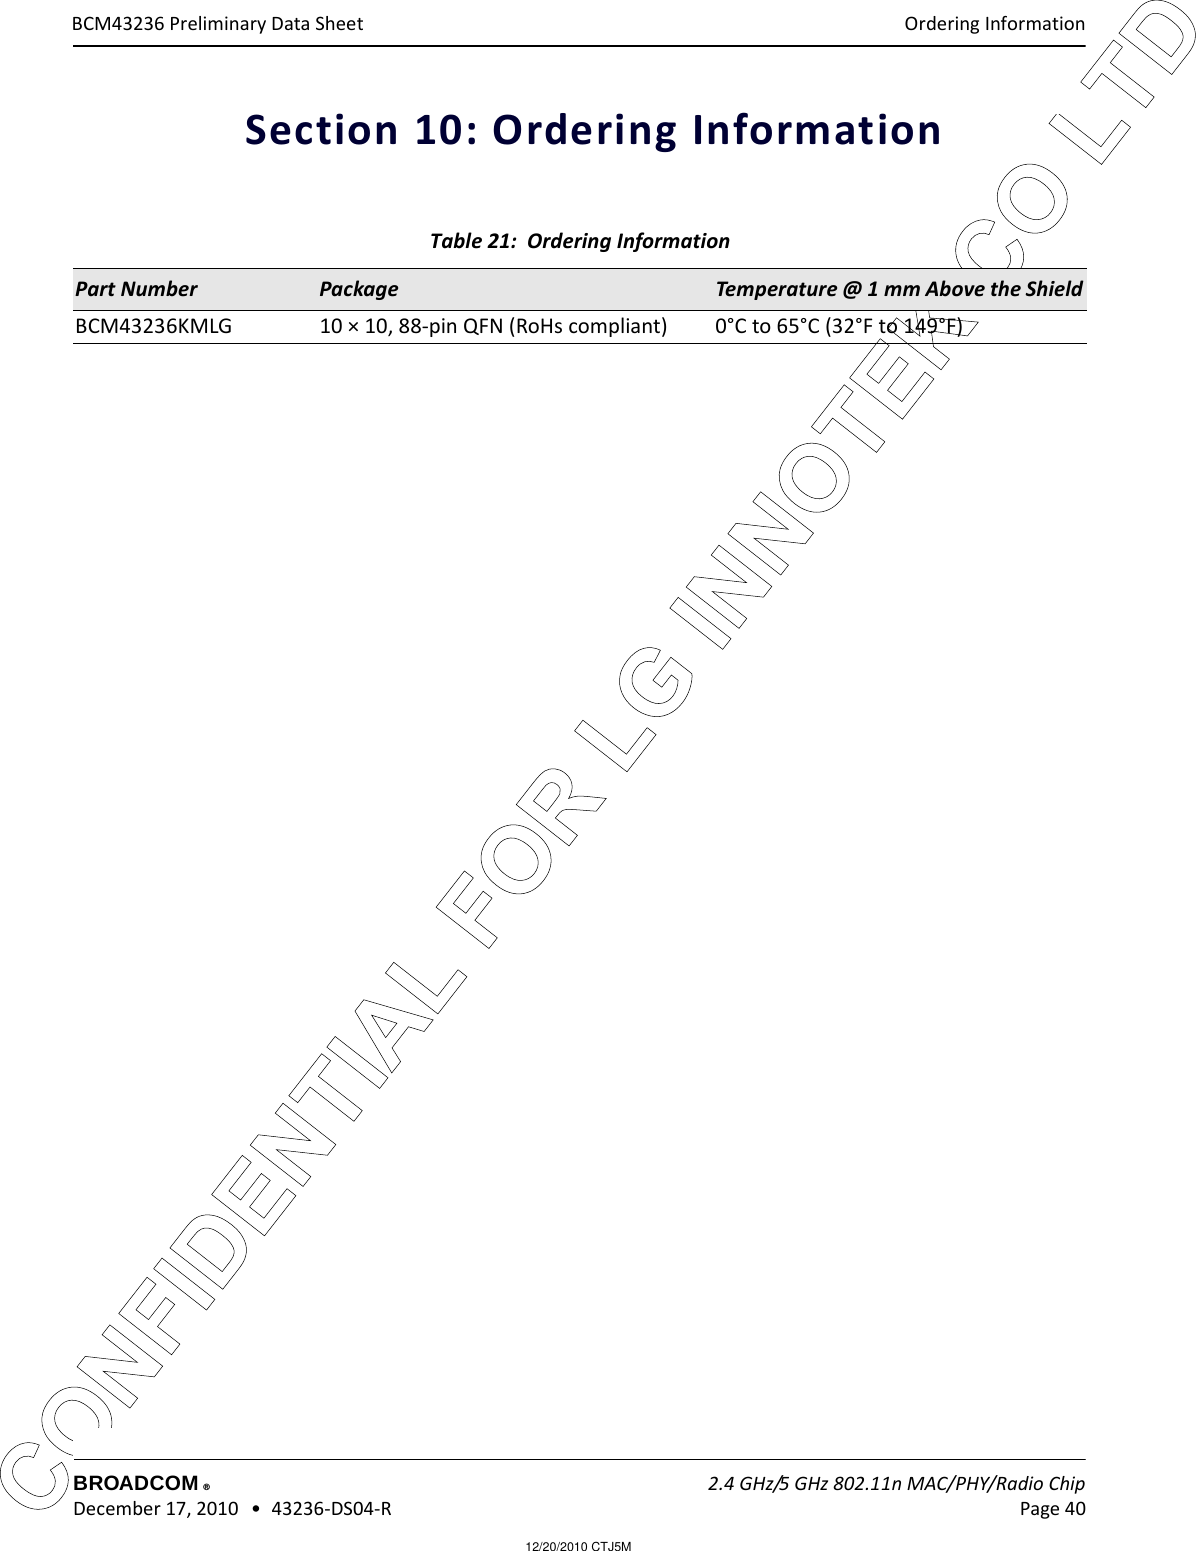 12/20/2010 CTJ5MCONFIDENTIAL FOR LG INNOTEK CO LTD Ordering InformationBROADCOM    2.4 GHz/5 GHz 802.11n MAC/PHY/Radio Chip December 17, 2010   •  43236-DS04-R Page 40®BCM43236 Preliminary Data SheetSection 10: Ordering Information Table 21:  Ordering InformationPart Number Package Temperature @ 1 mm Above the ShieldBCM43236KMLG 10 × 10, 88-pin QFN (RoHs compliant)  0°C to 65°C (32°F to 149°F)